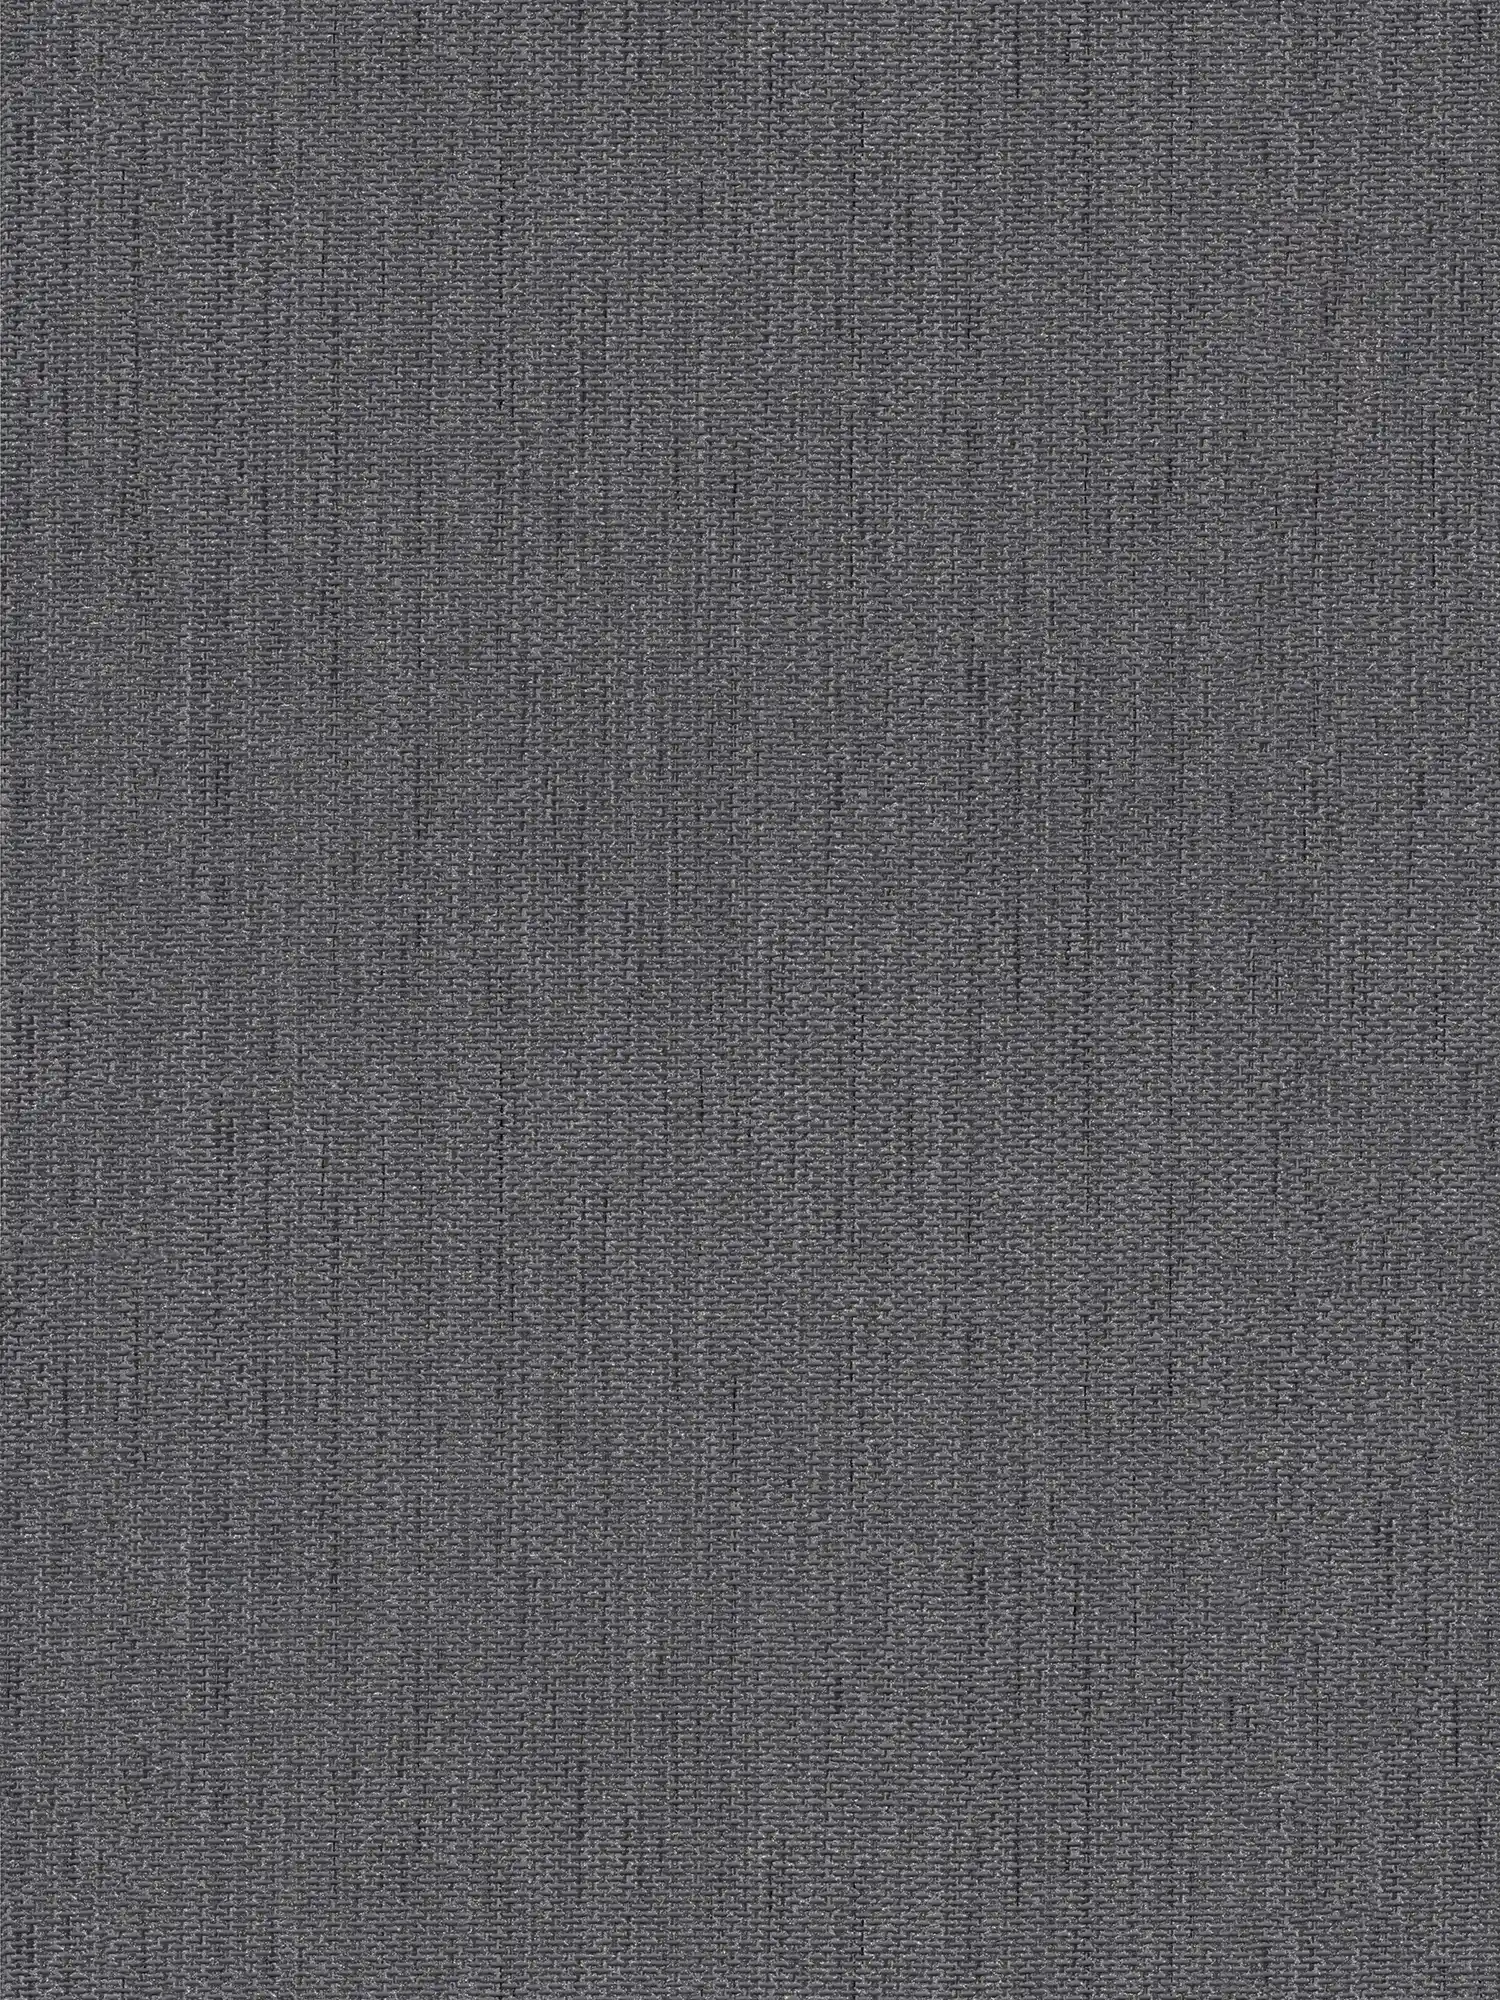 Linen look wallpaper with textile structure - grey, black
